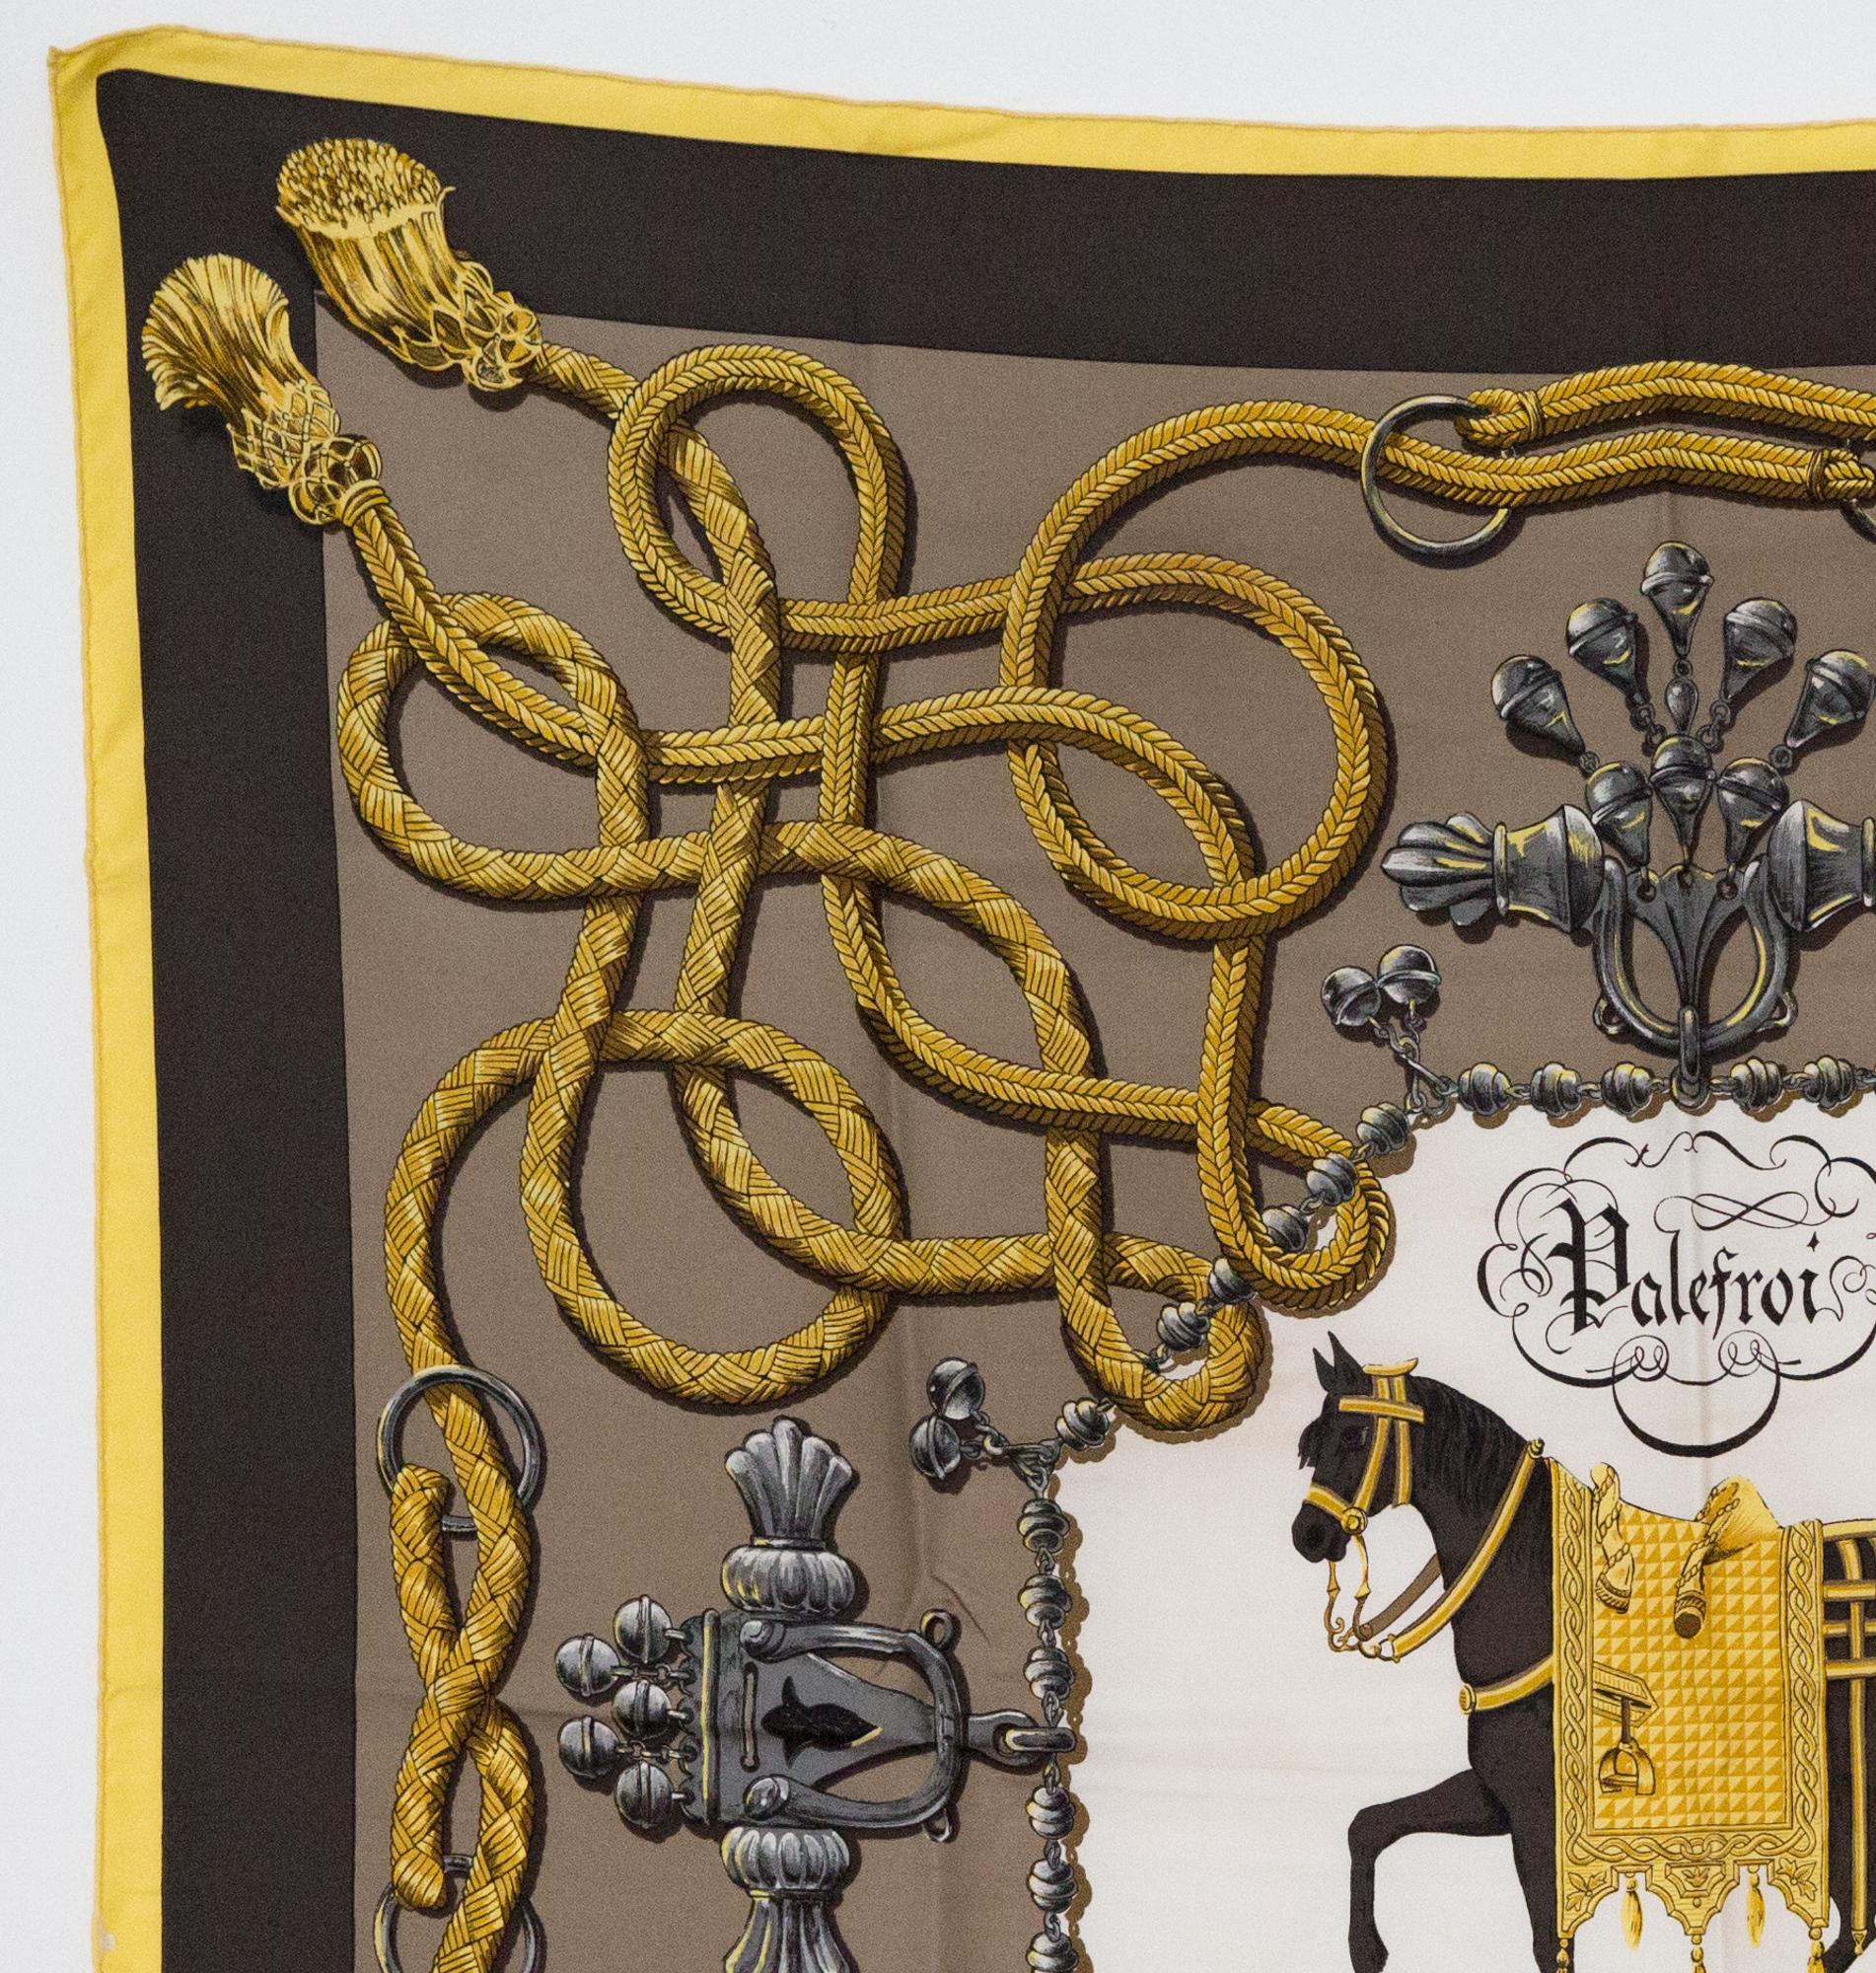 Hermes silk scarf Palefroi by Francoise de la Perriere featuring a brown border, a horse scene.
In excellent vintage condition. Made in France.
First issue: 1965s
35,4in. (90cm)  X 35,4in. (90cm)
We guarantee you will receive this  iconic item as